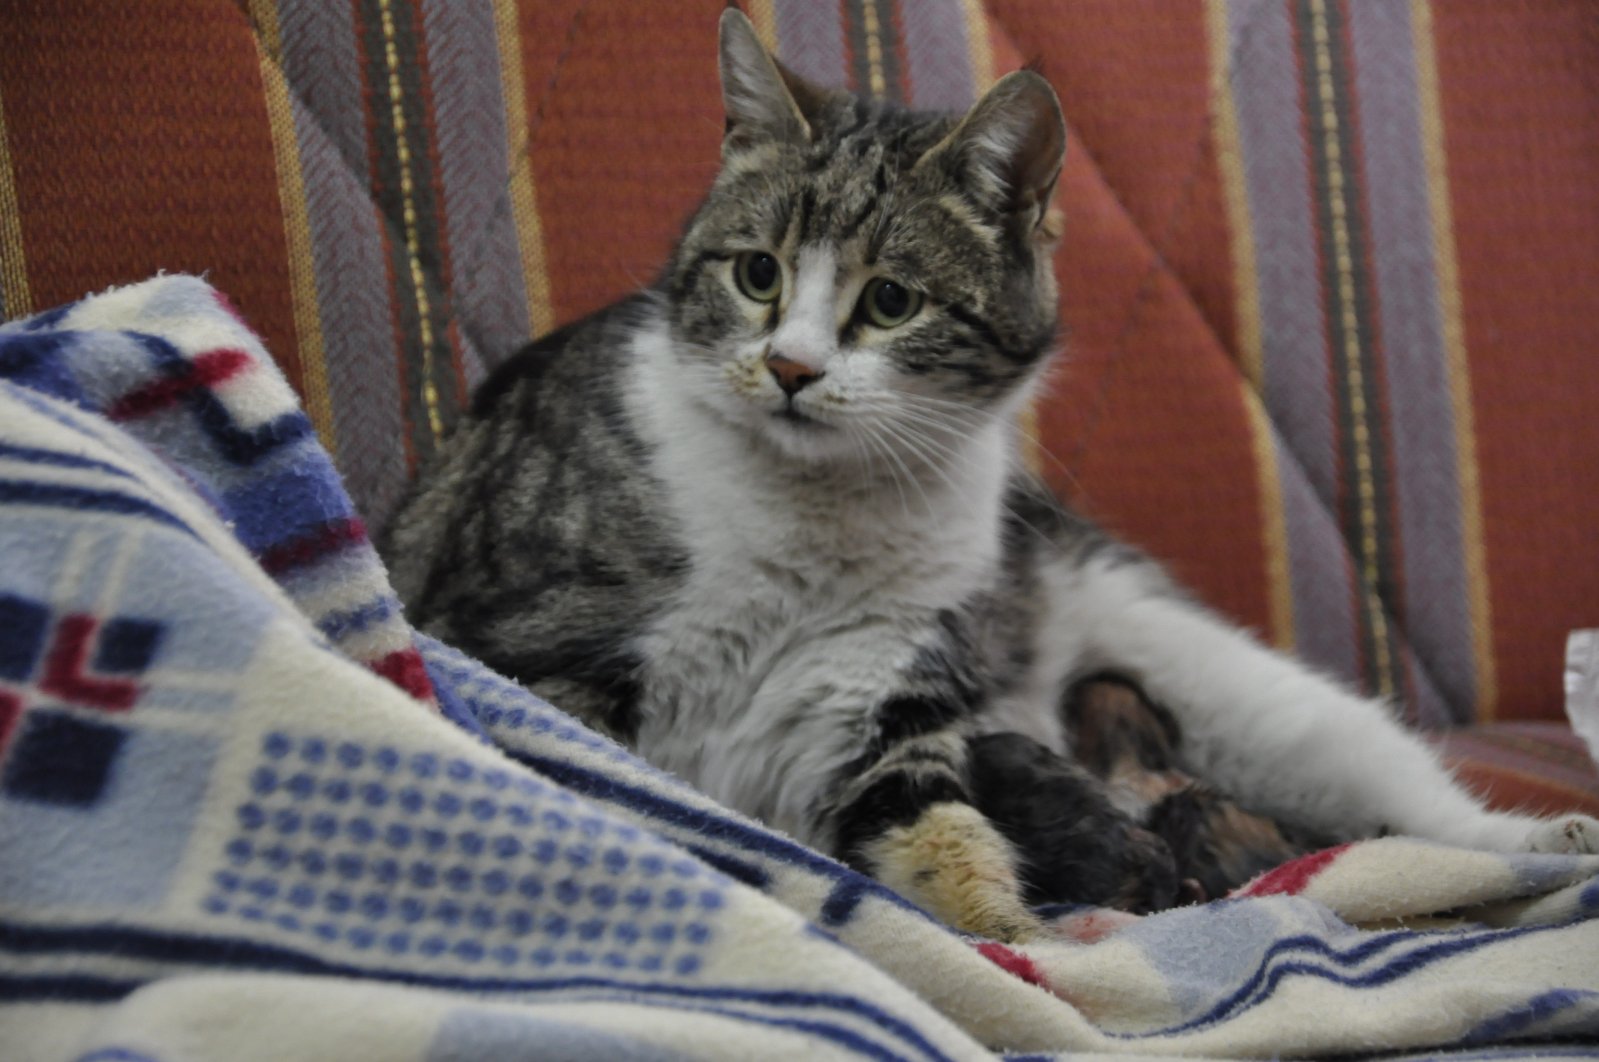 The cat and her four kittens at the family health center, Karaman, Turkey, April 5, 2022. (IHA Photo)